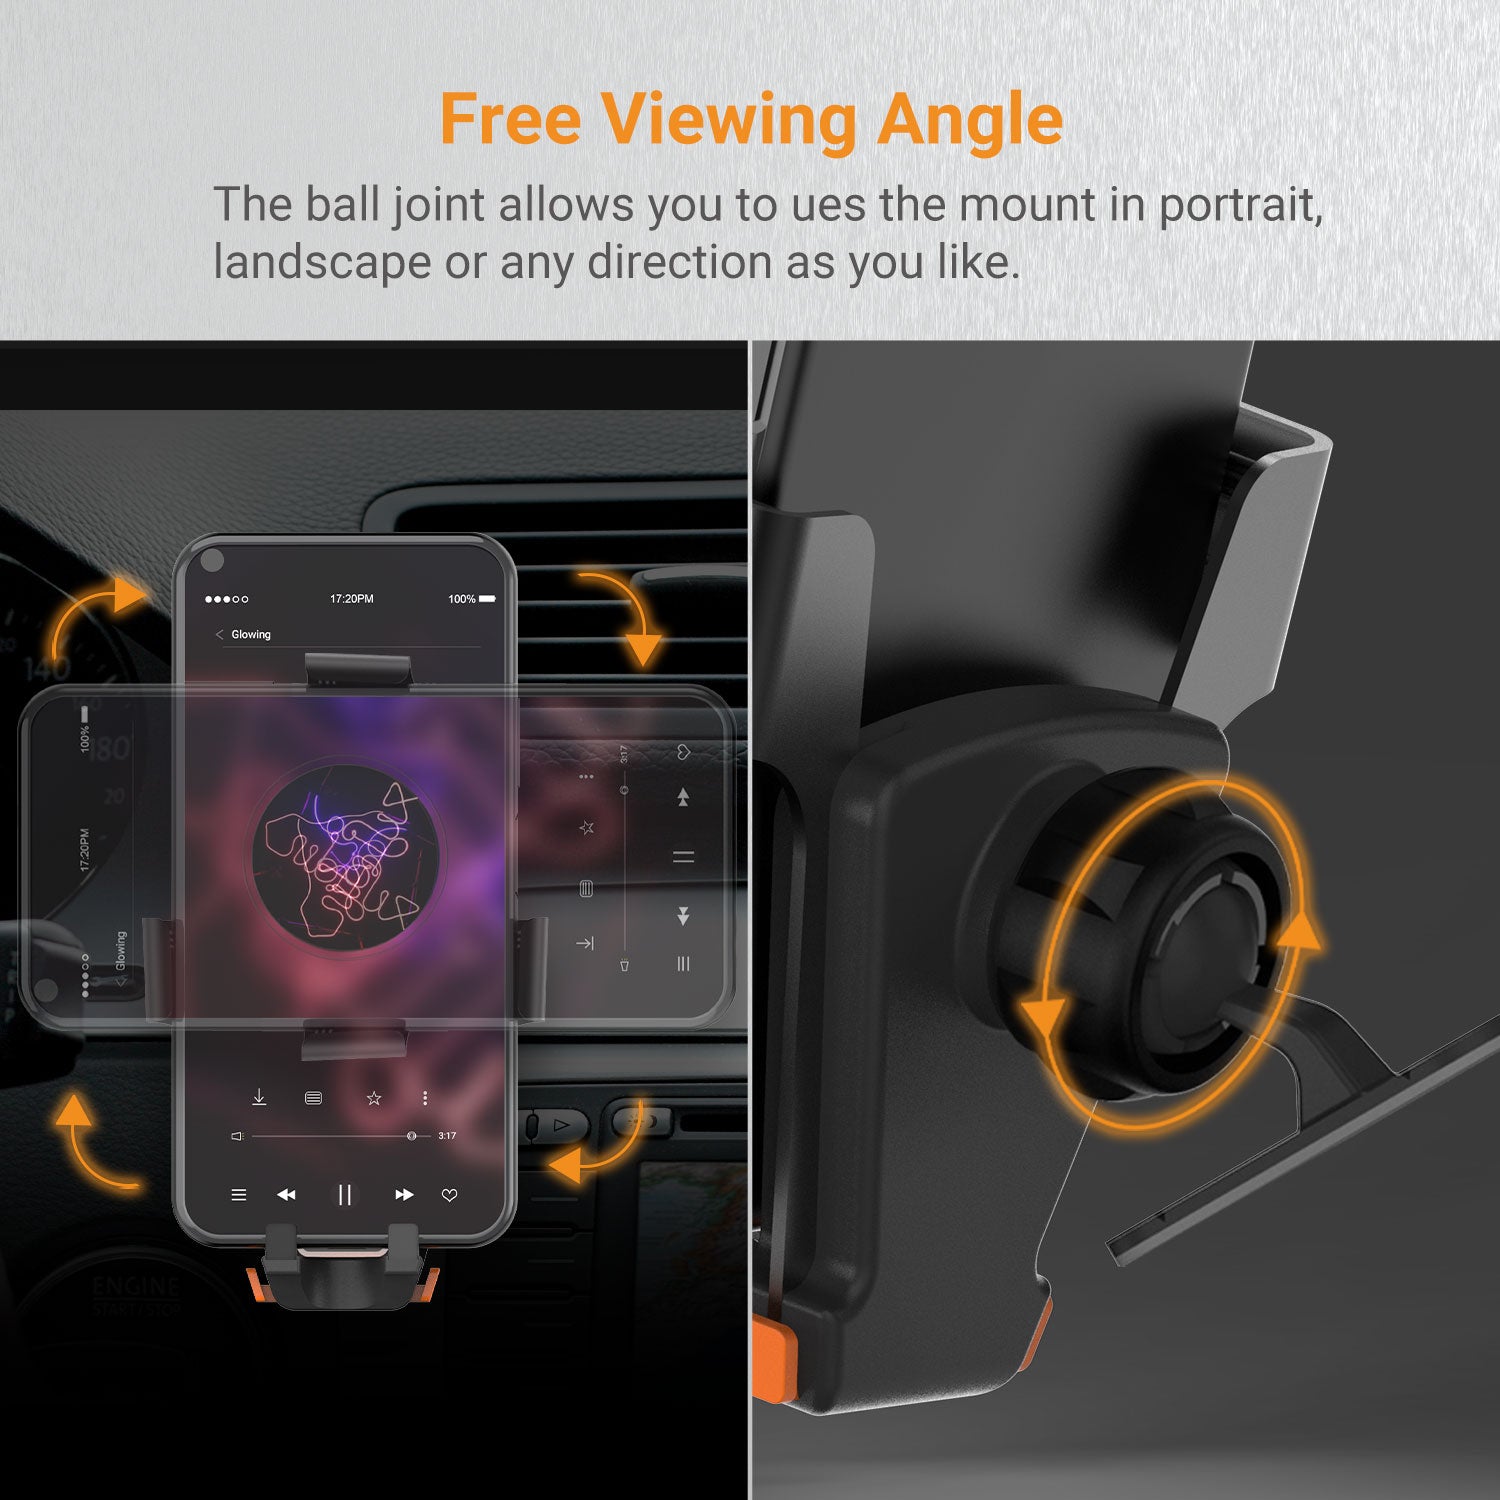 Infinite Viewing Angles